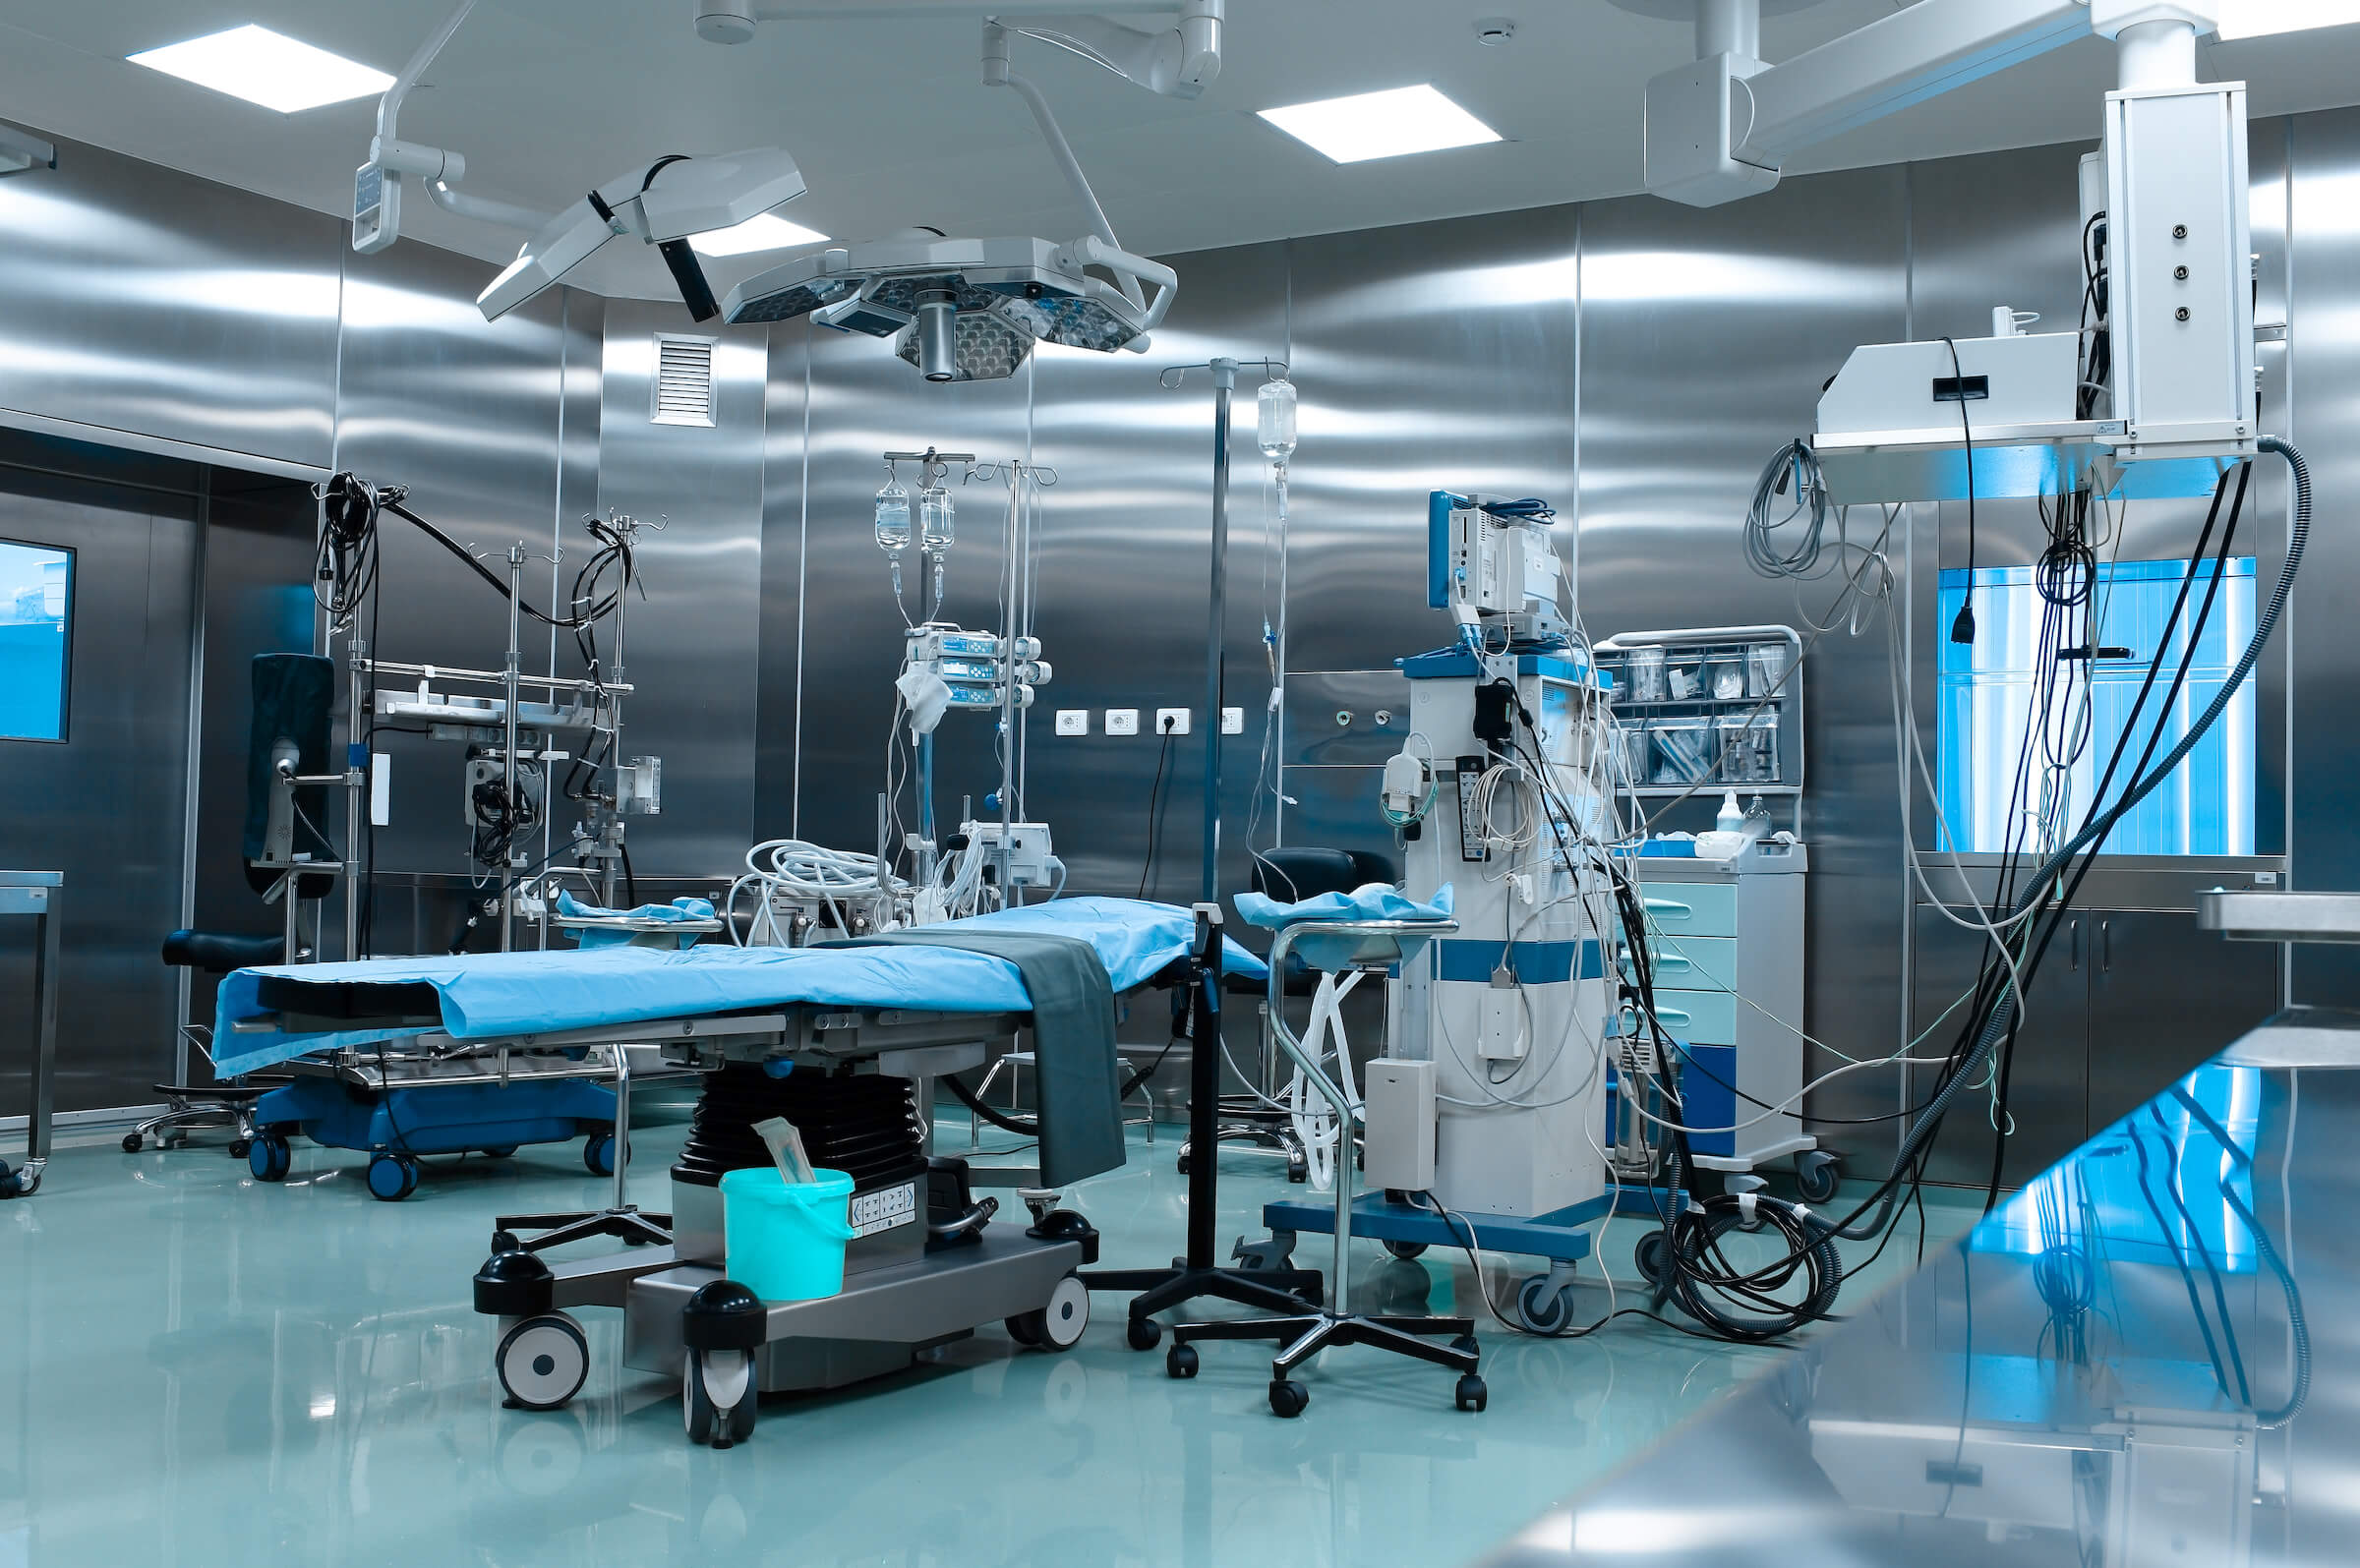 Image showing a modern operating room